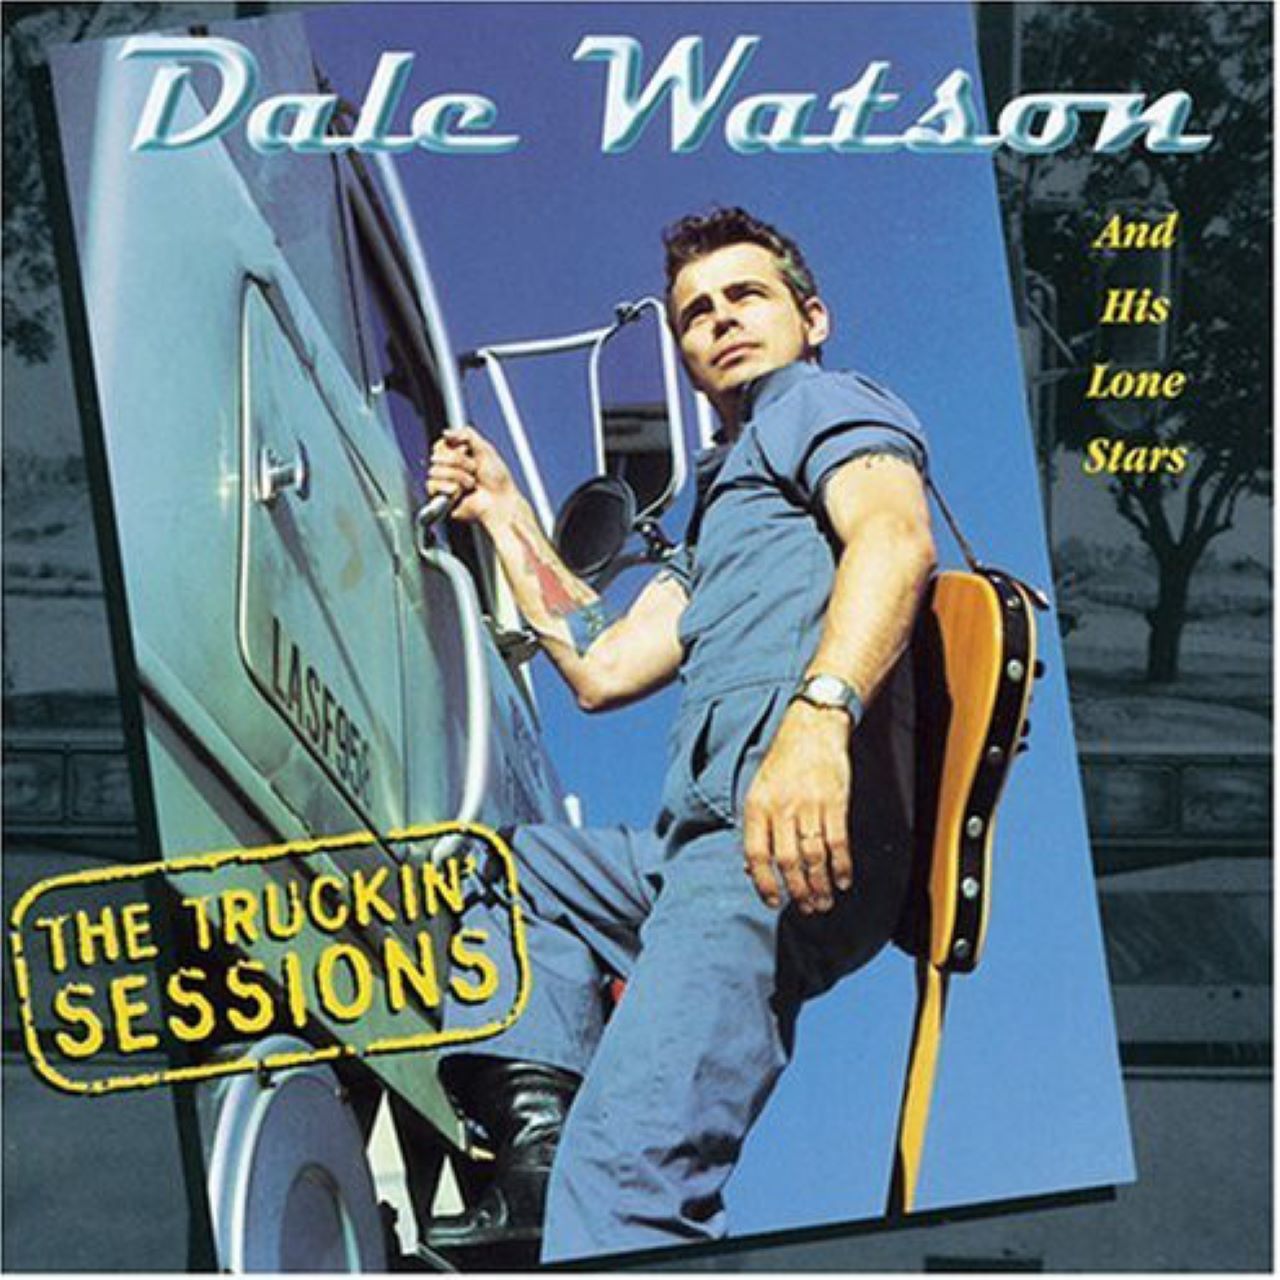 Dale Watson - The Truckin' Sessions cover album